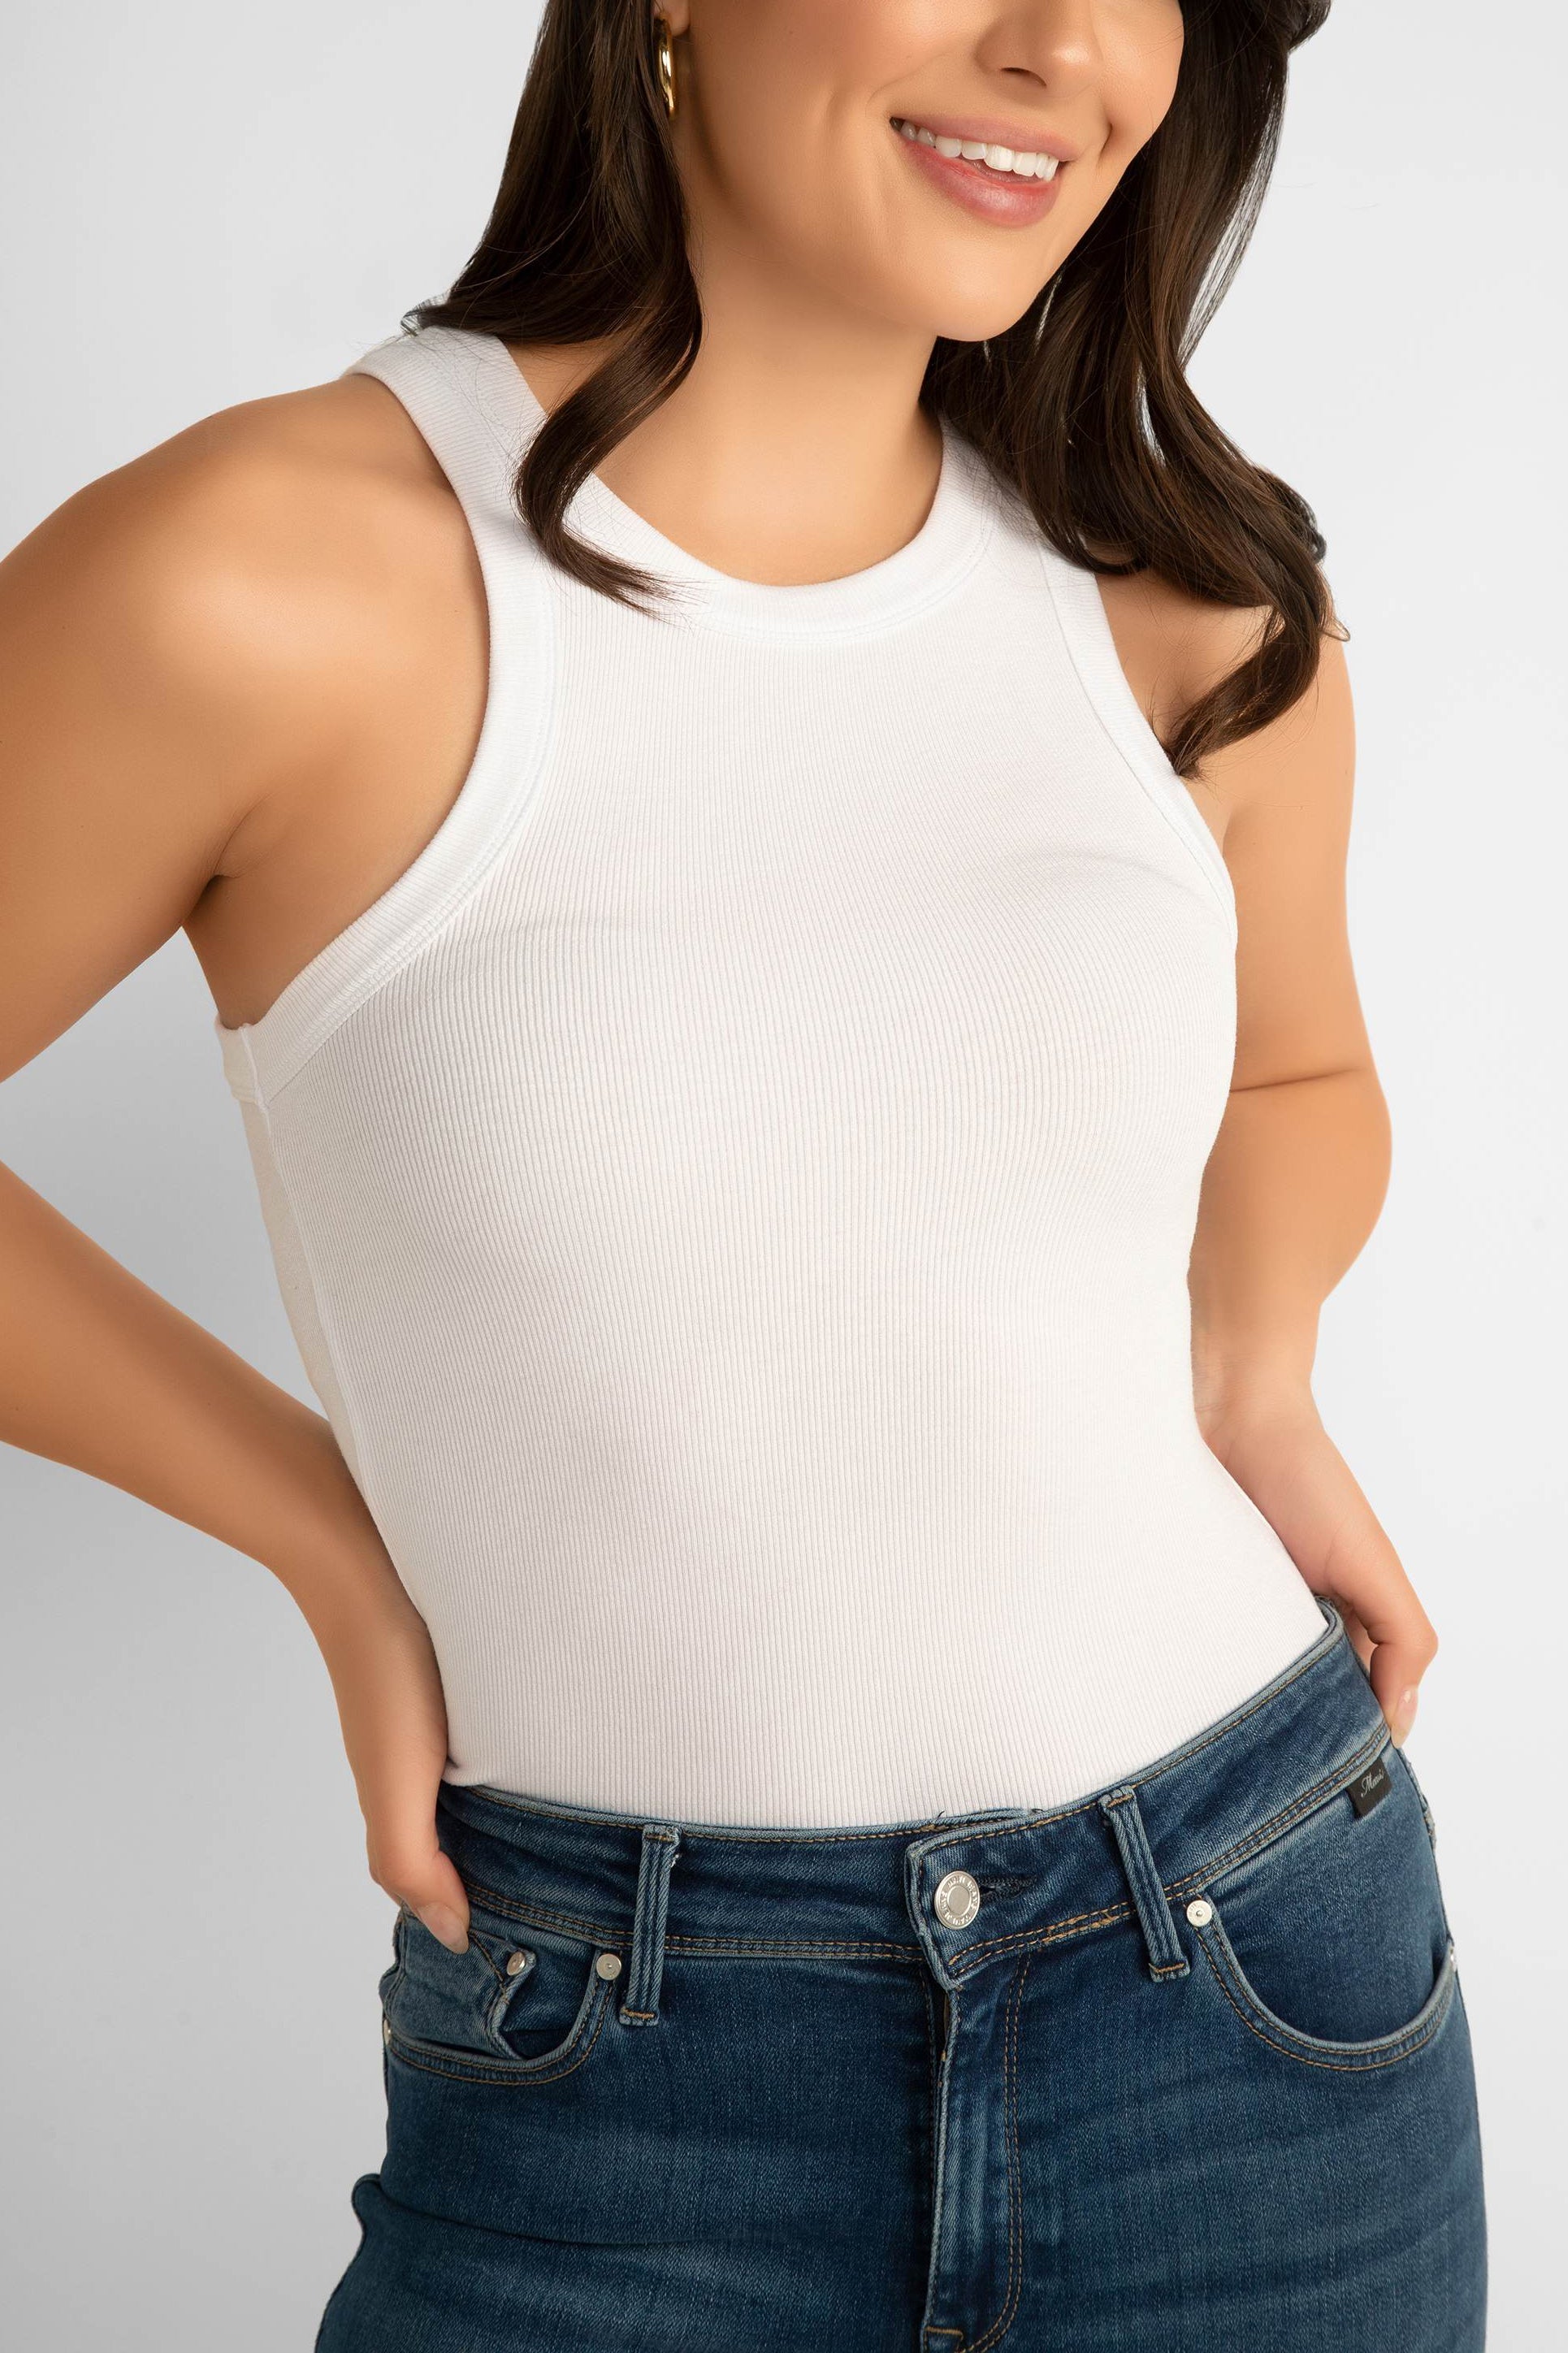 Pink Martini (TO-679542) The Danika Top - Women's Classic Ribbed Knit, Racerback Tank Top in White